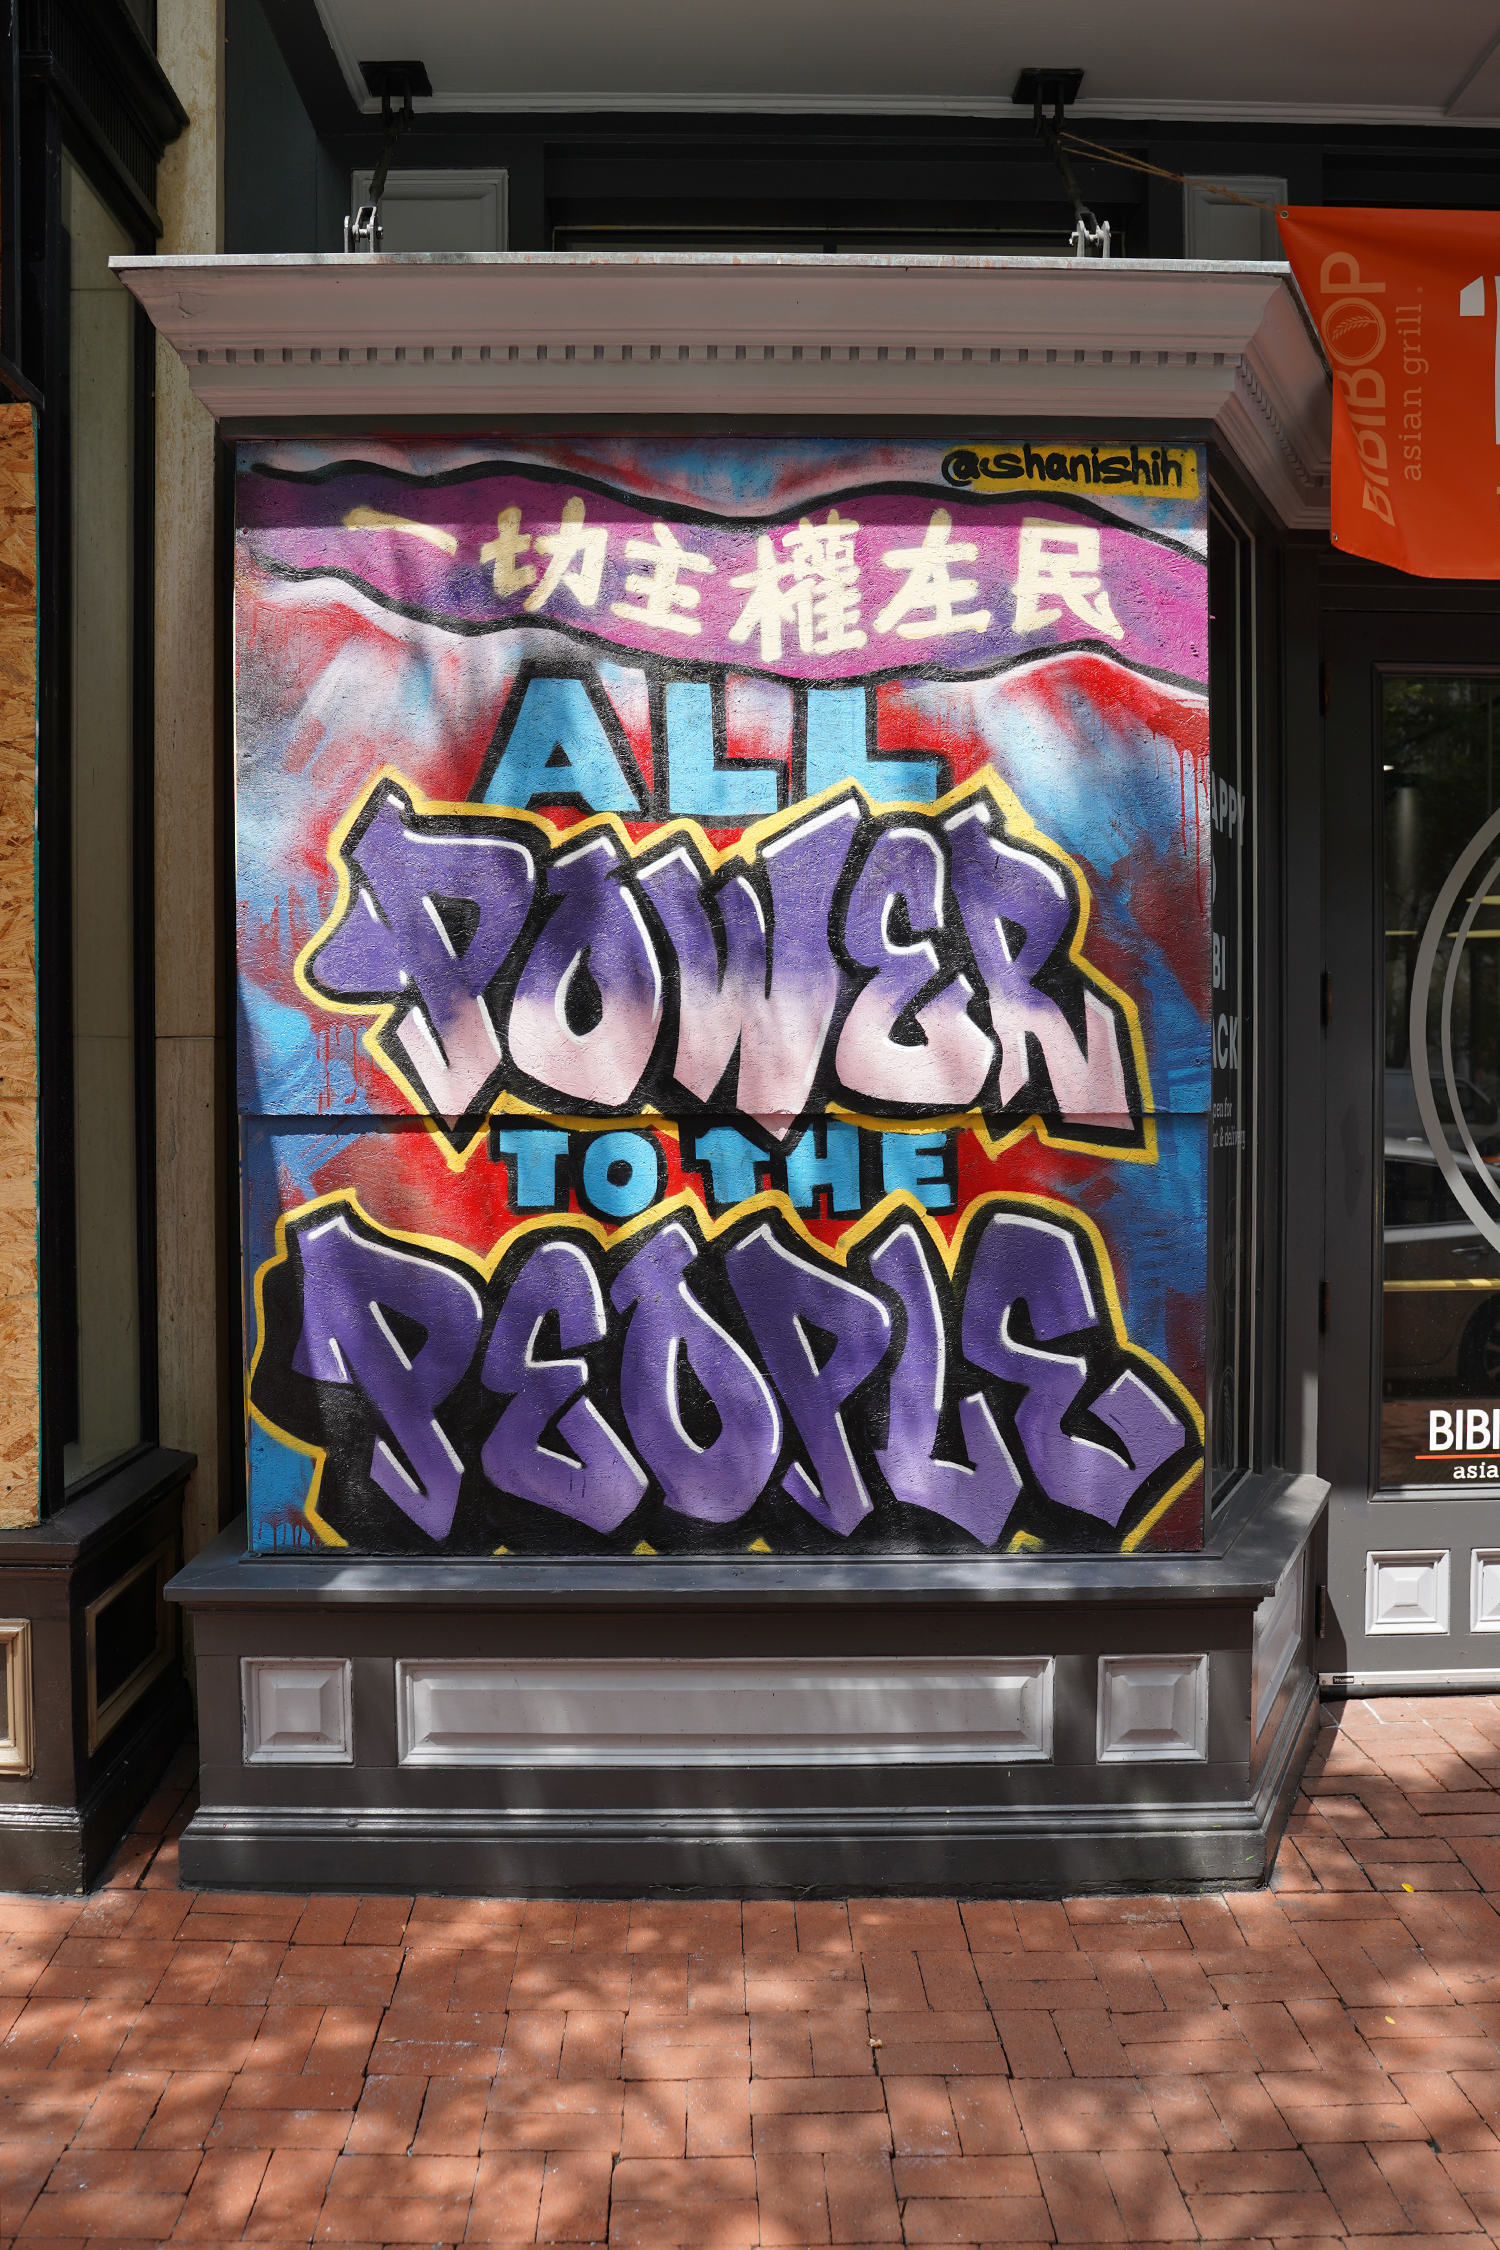 Gallery Place Murals 12: All Power to the People, by Shani Shih